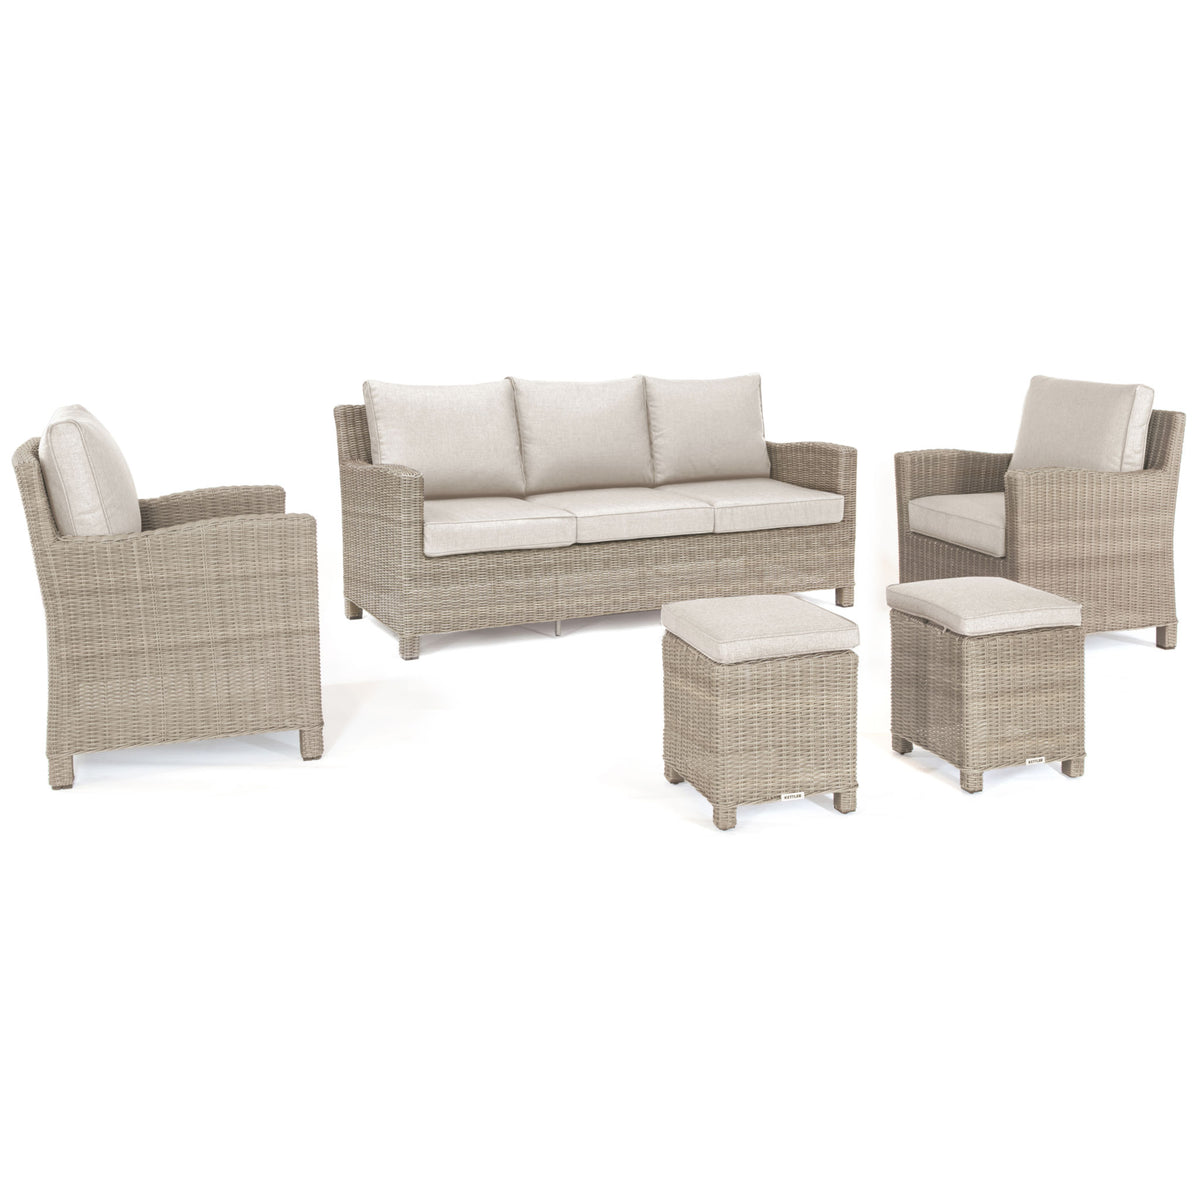 Kettler Palma Oyster Wicker Outdoor Casual Dining Lounge Sofa Set